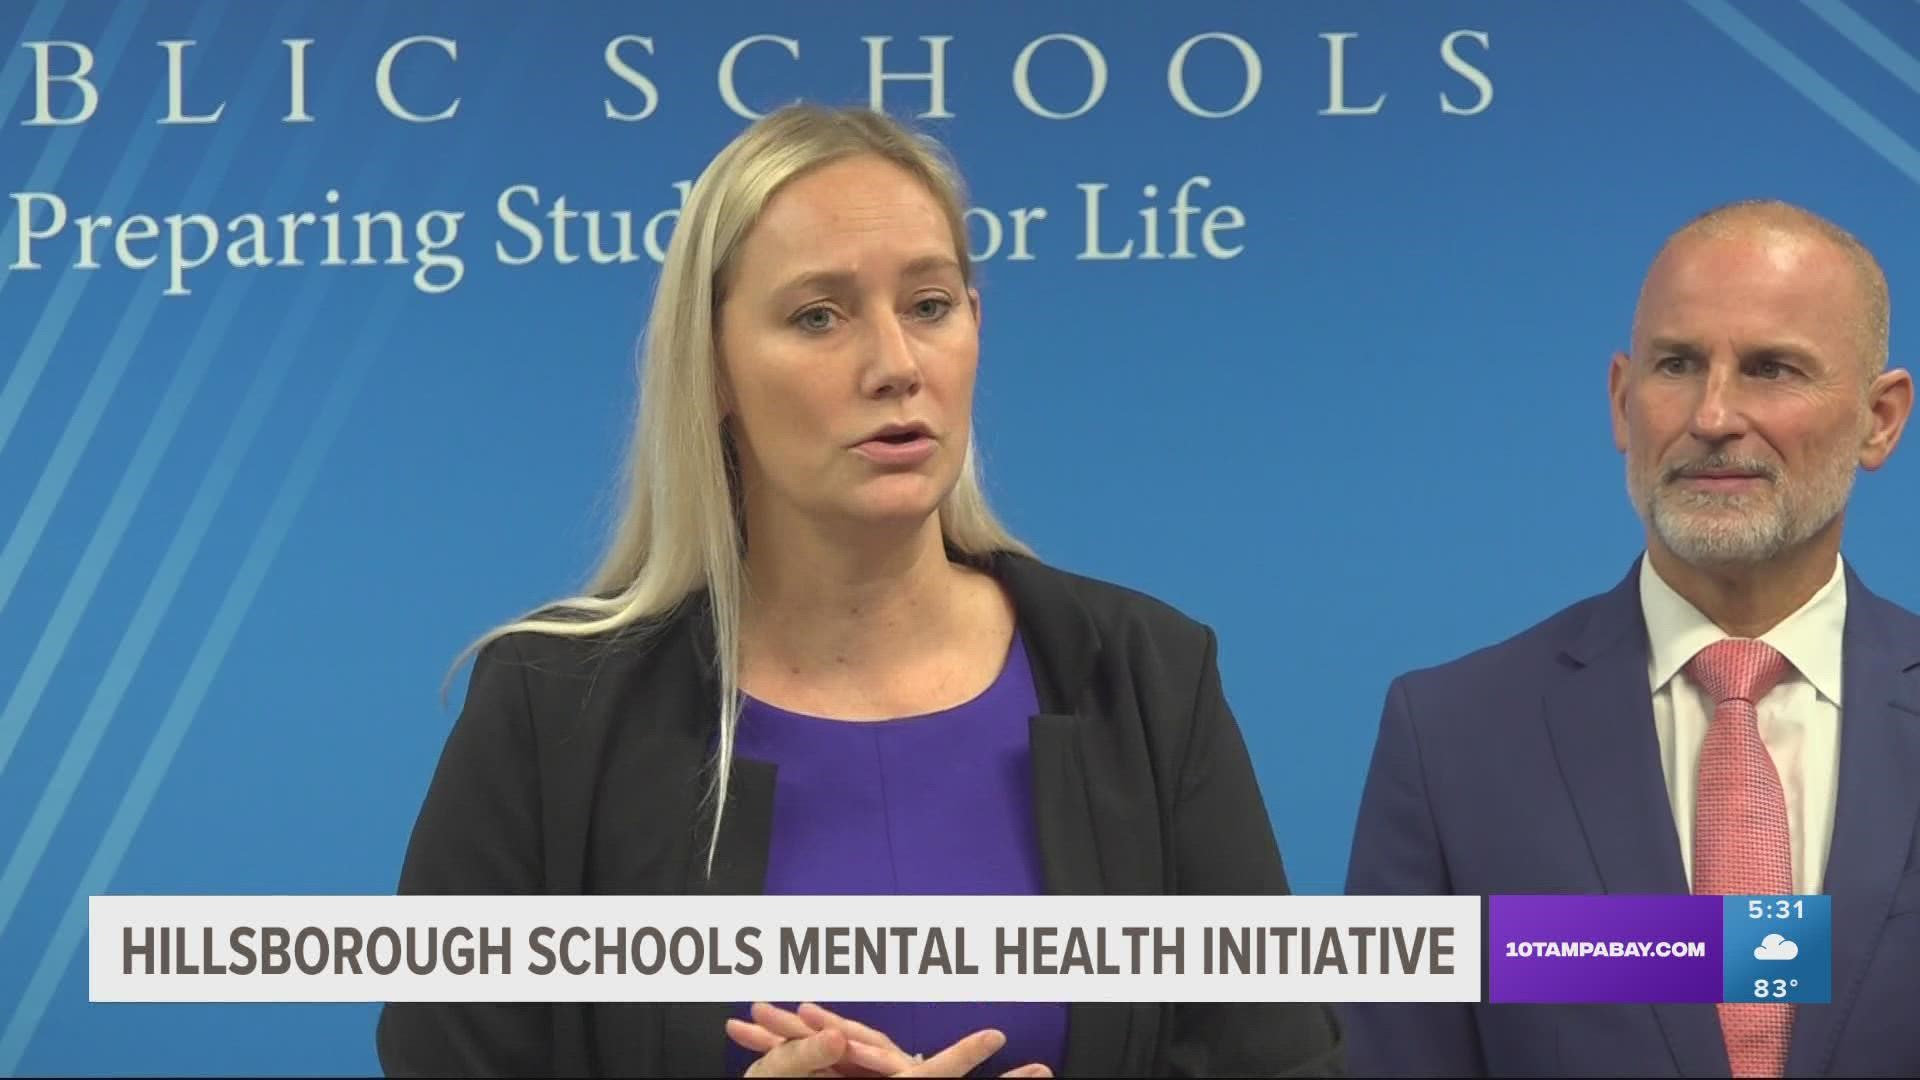 The district aims to give students more resources when it comes to mental health after seeing an uptick in students needing help.